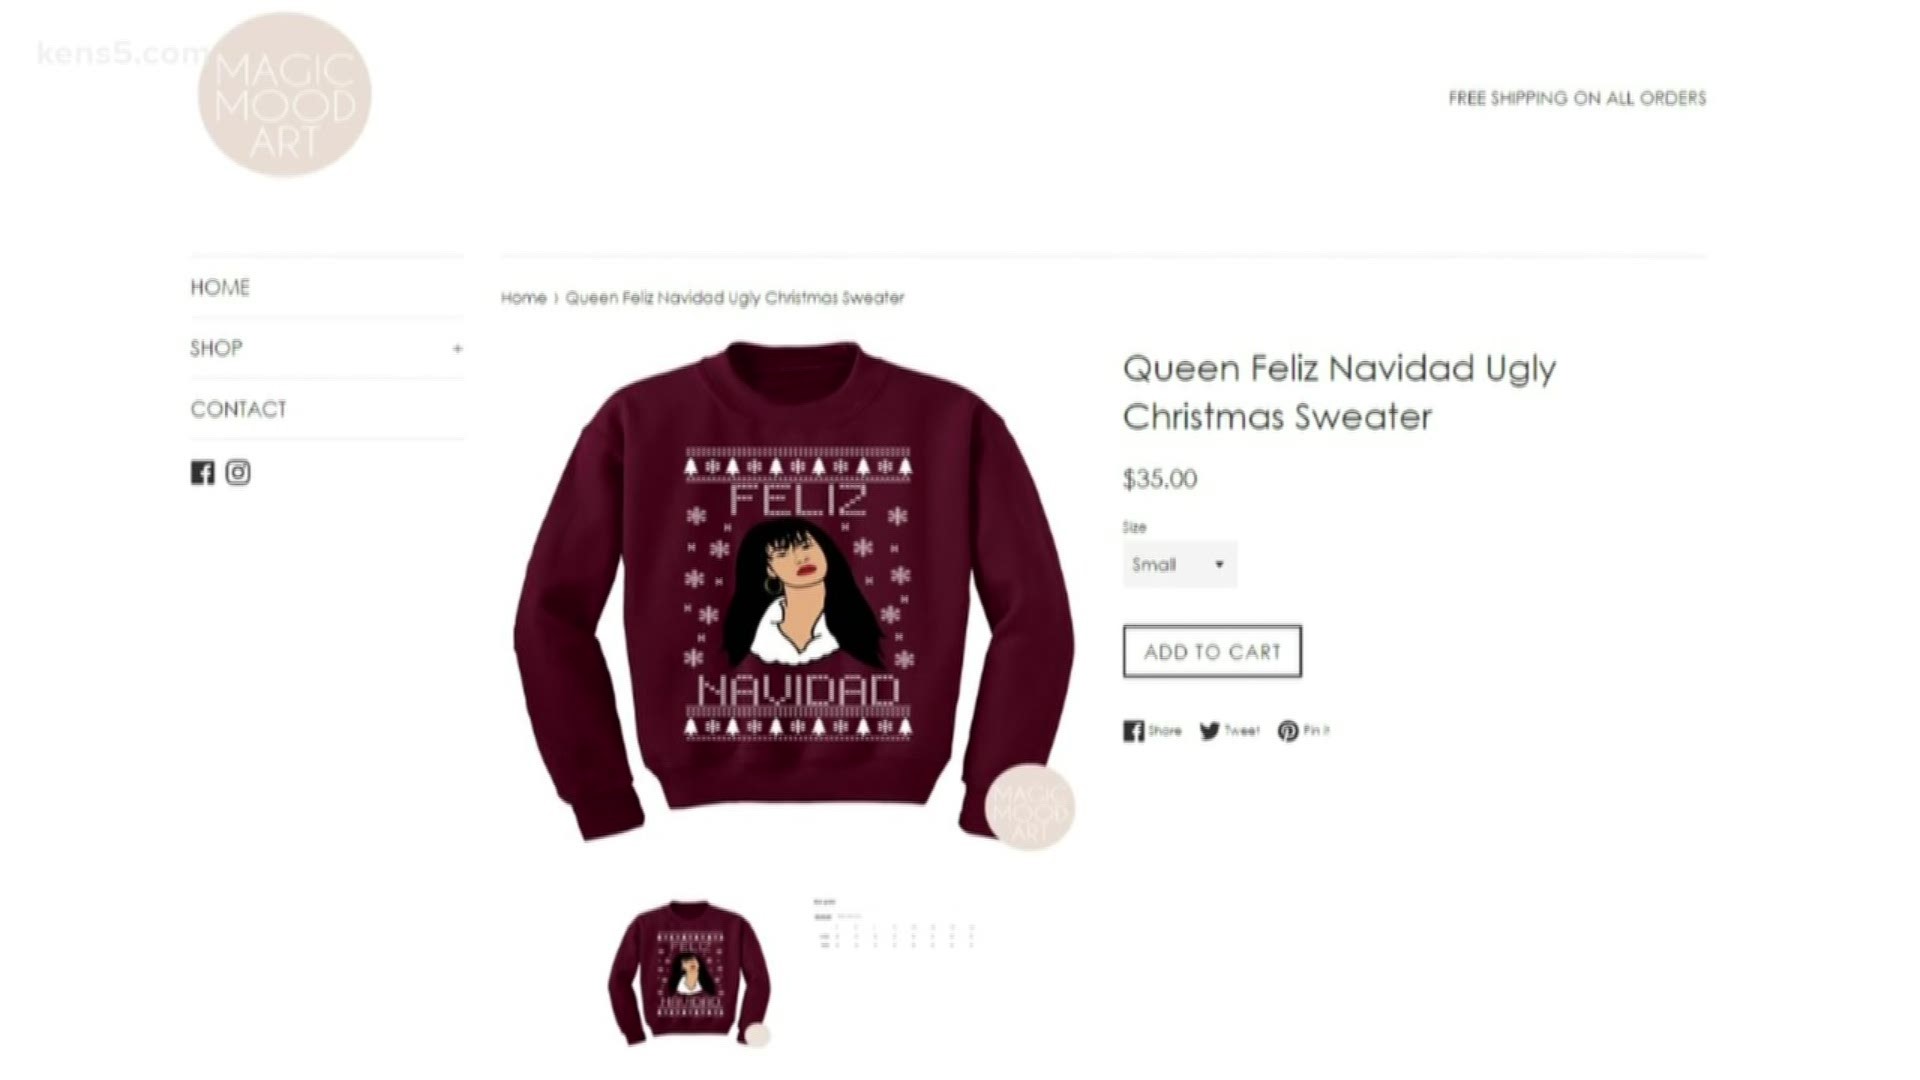 It's a puro Christmas sweater featuring the "Queen of Cumbia."